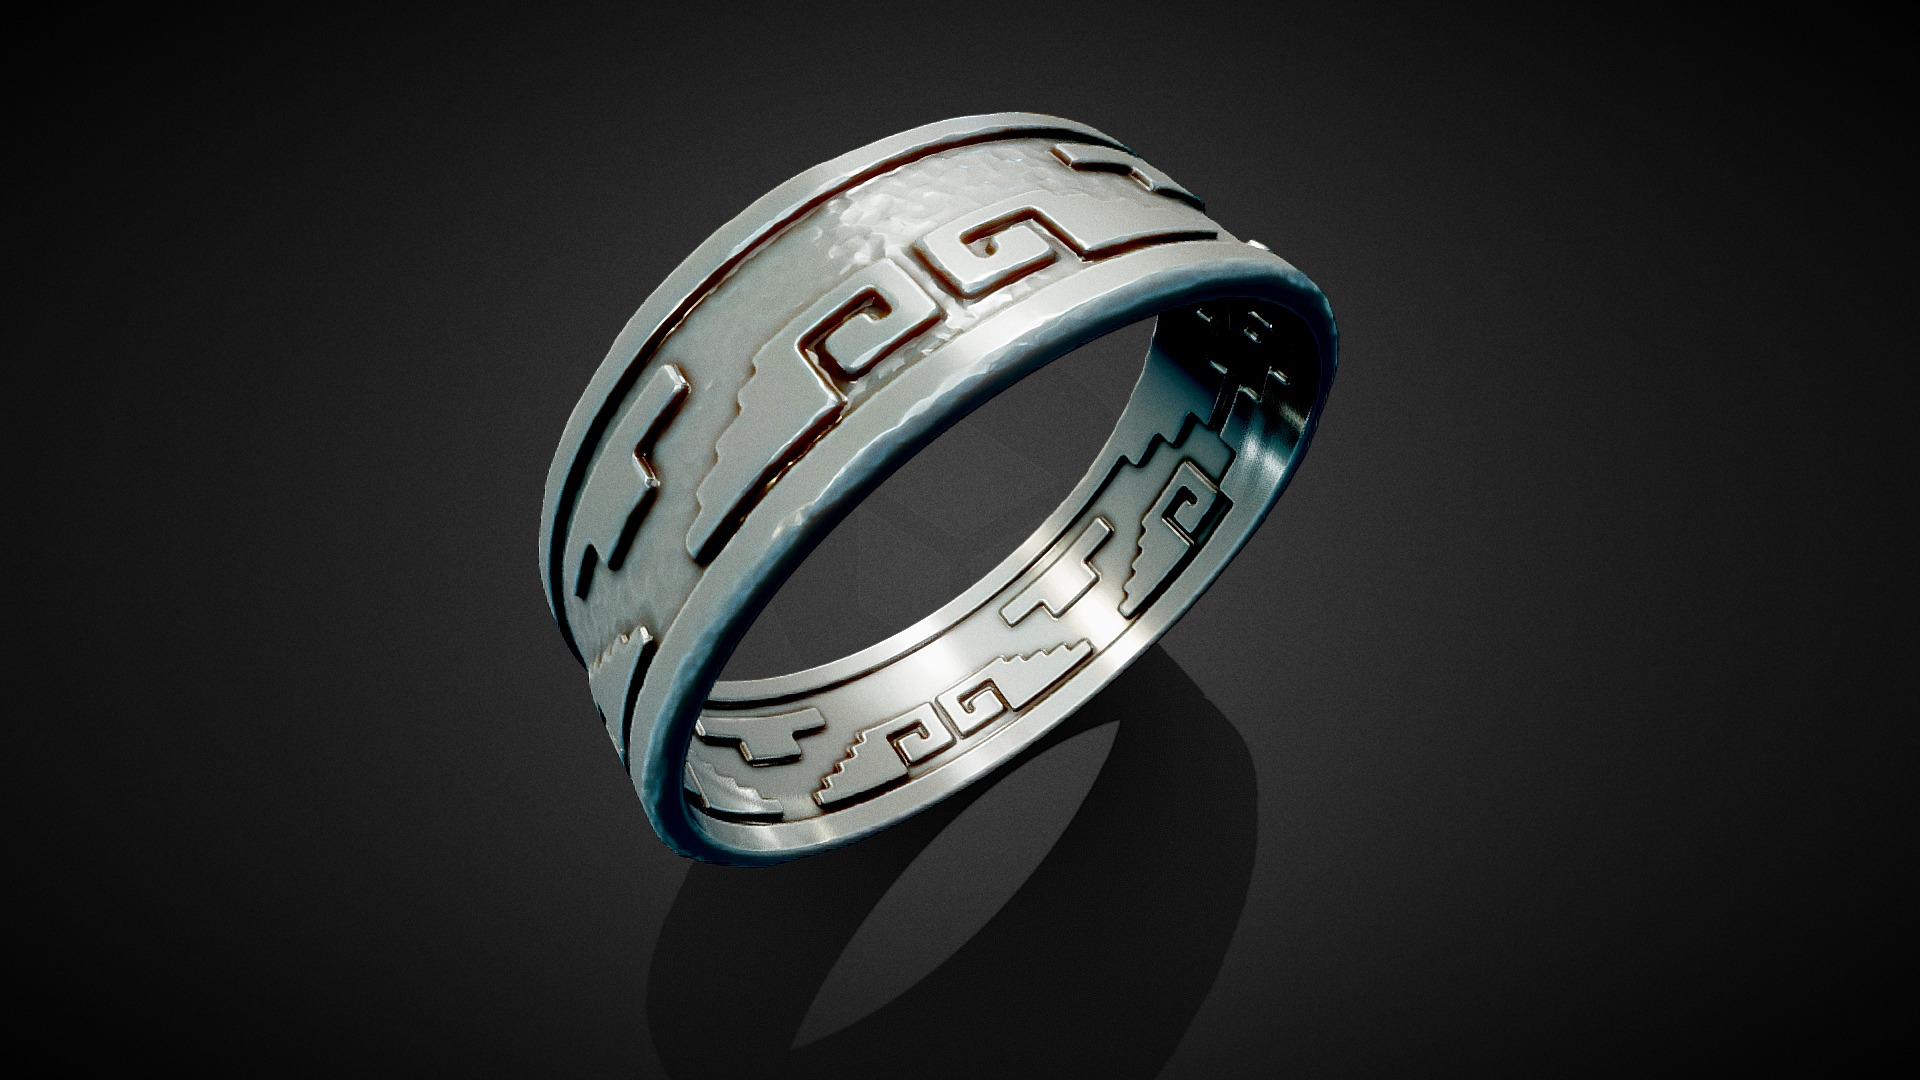 3D model 3D Aztec Ring – High Poly - This is a 3D model of the 3D Aztec Ring - High Poly. The 3D model is about a close up of a ball.